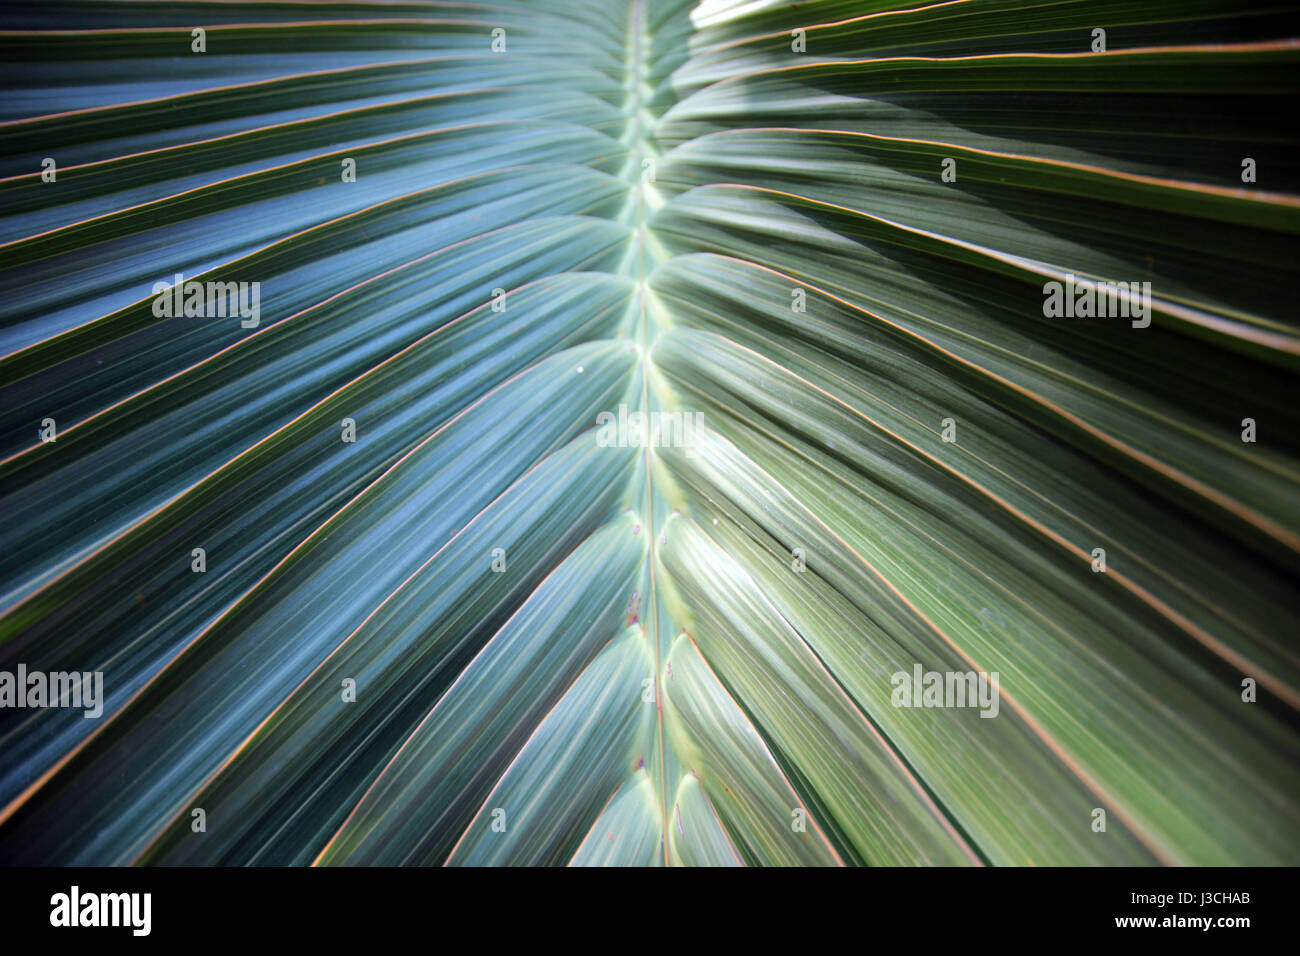 Mexican palm tree Stock Photo